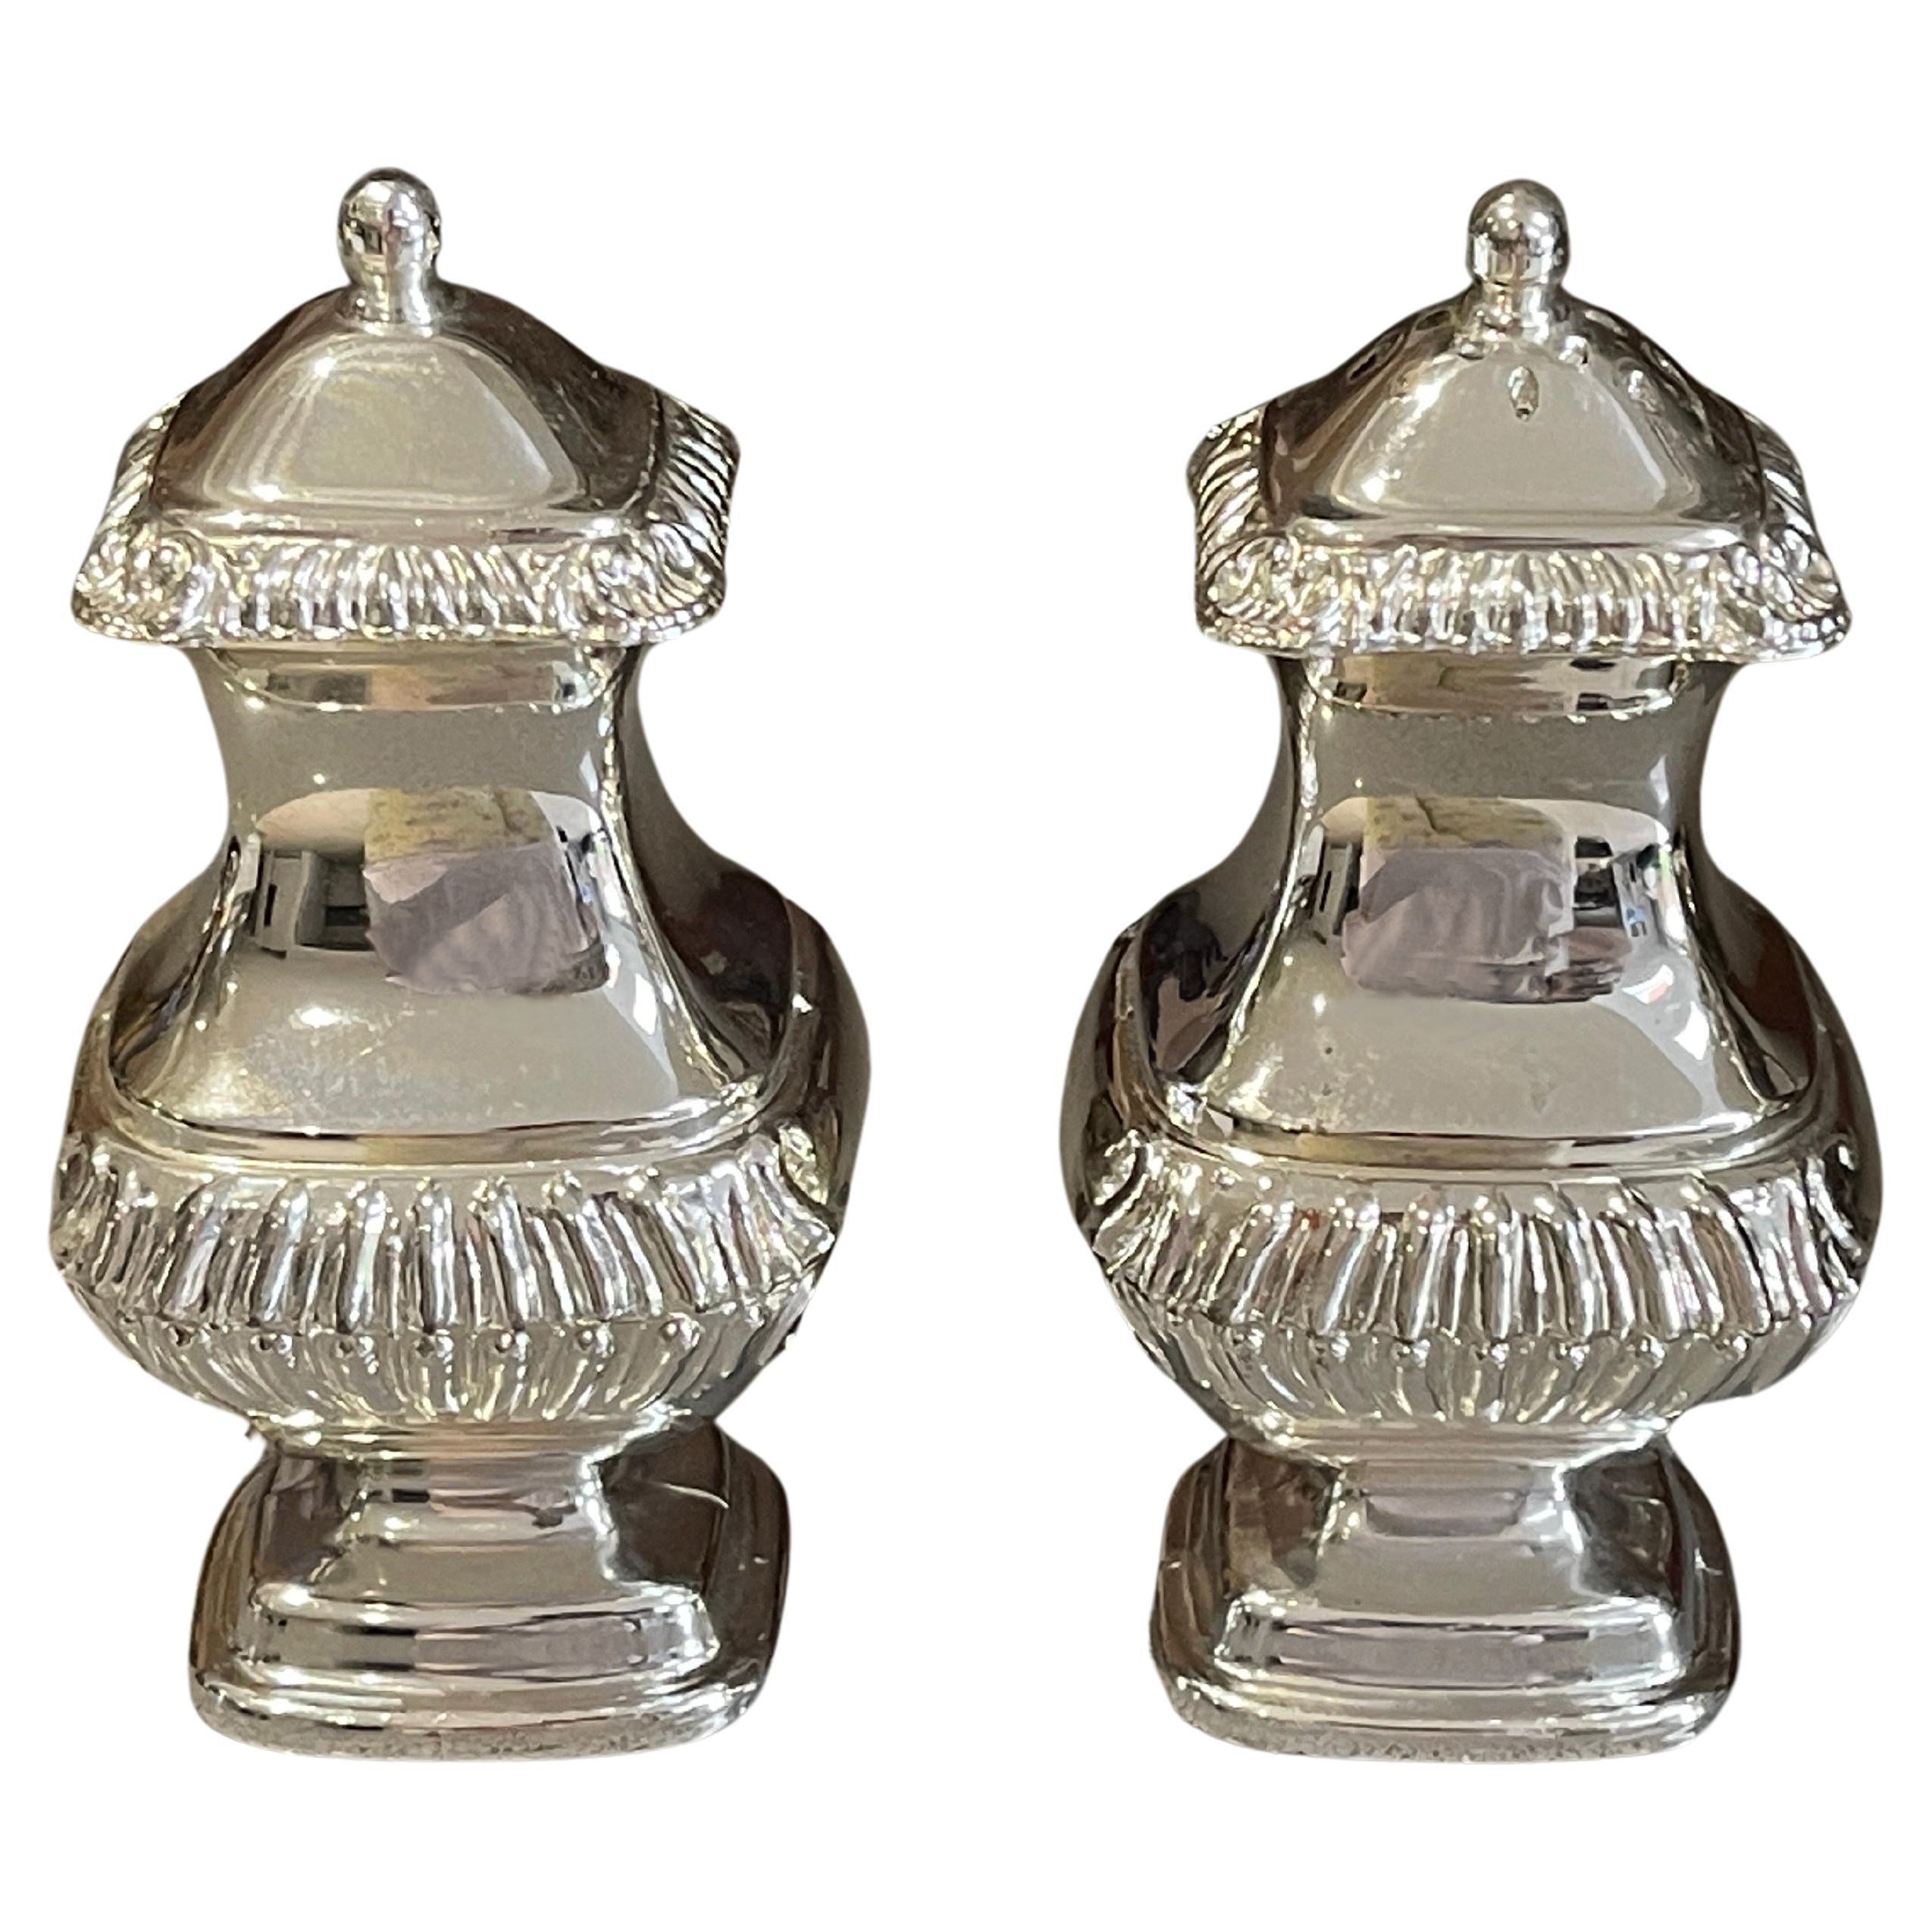 Antique Silver Salt Shaker Rococo Style, Pair of Decorative Pepper Shaker Sale  For Sale